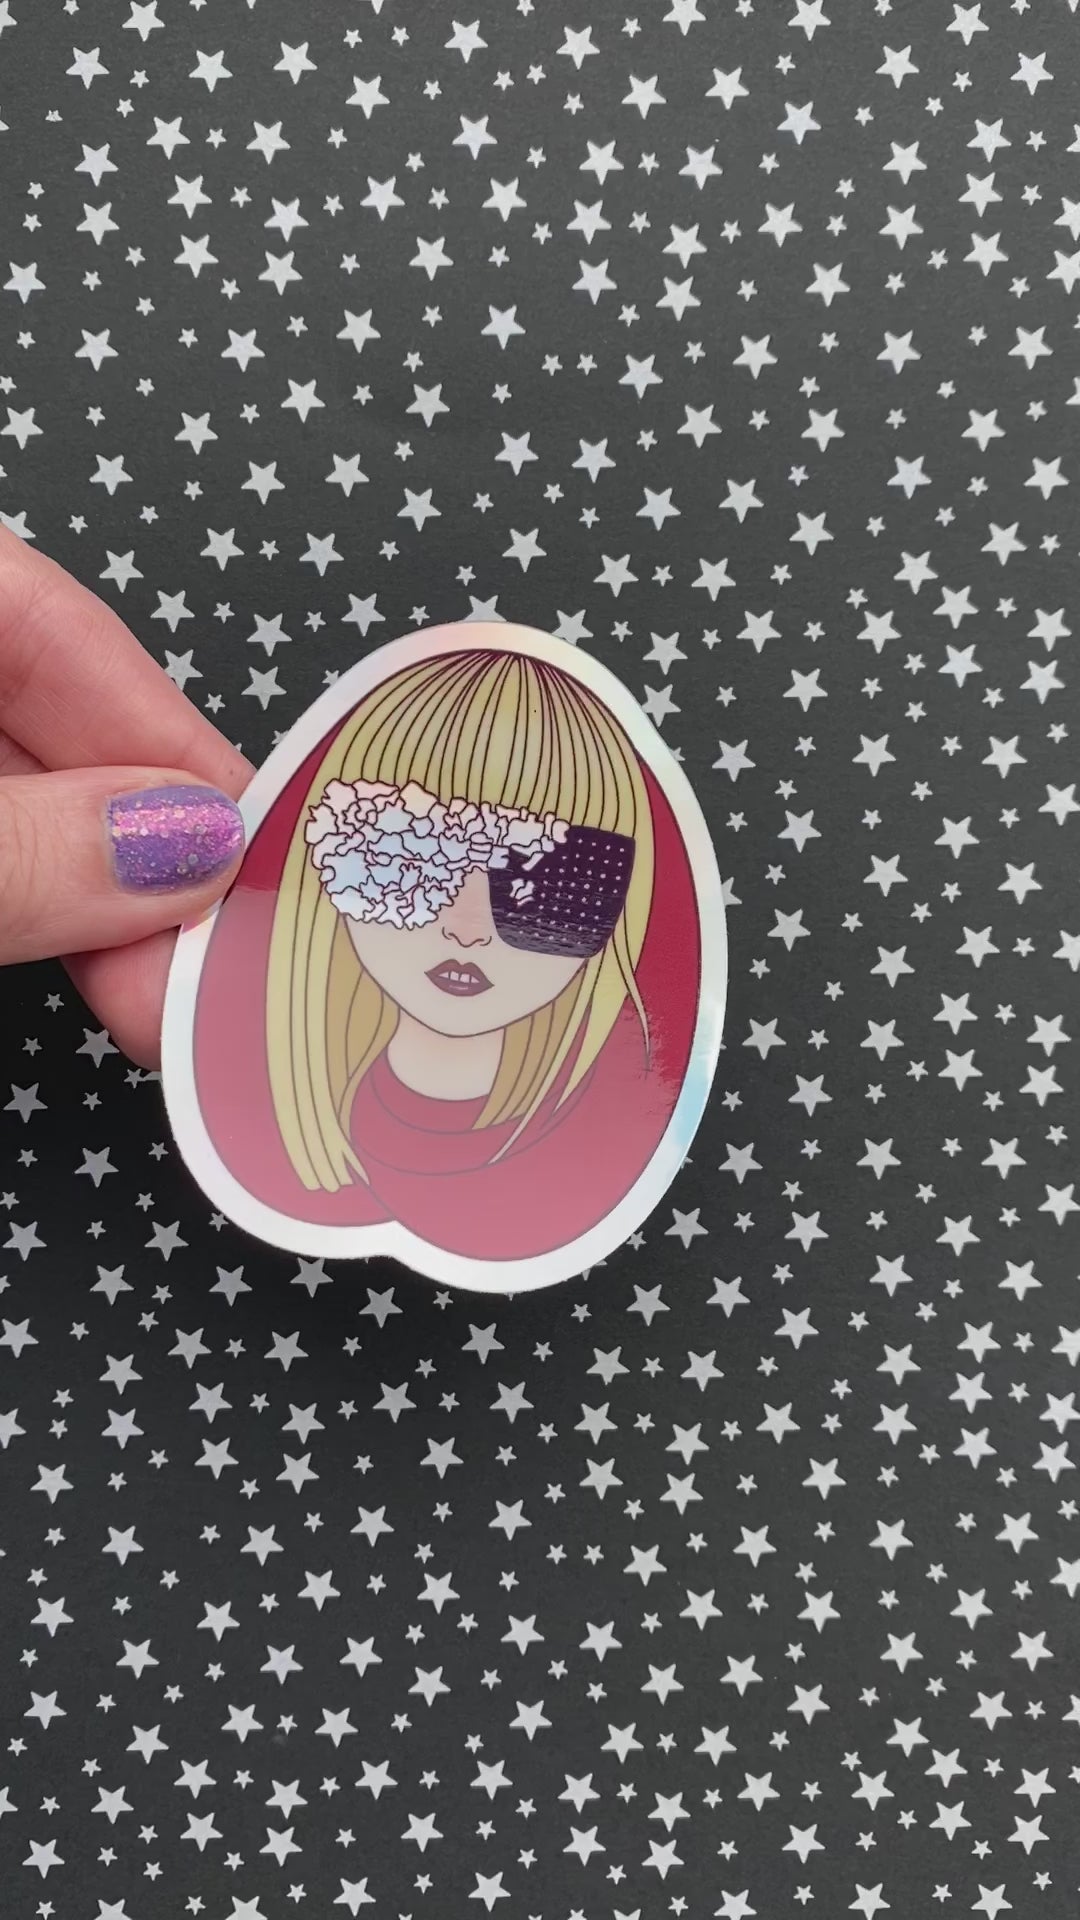 A person with purple nail polish holding an illustrated sticker of Lady Gaga wearing a red hood and black and irridescent glasses against a black background with silver stars